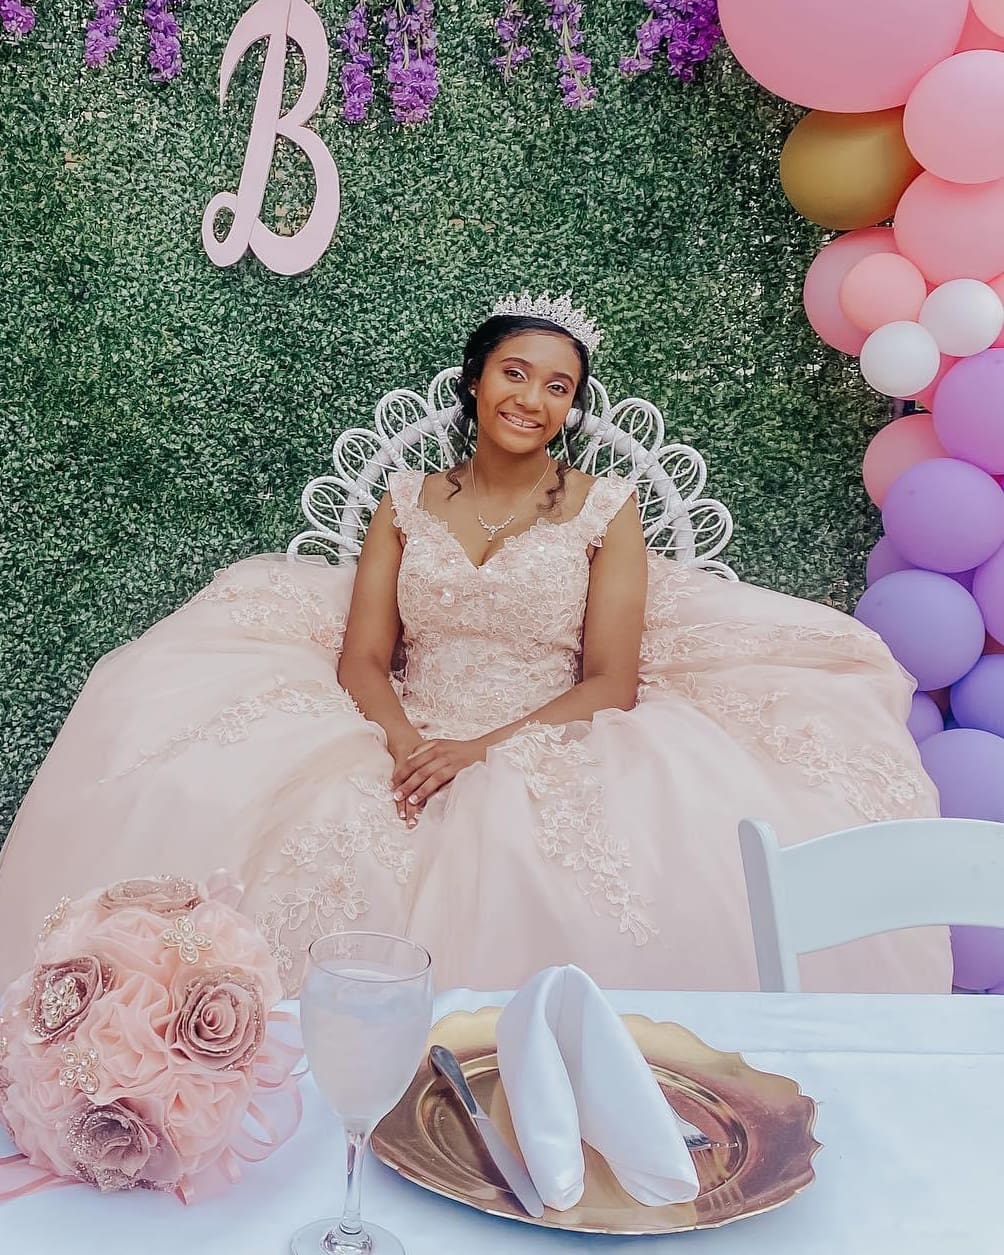 A woman in a pink gown and tiara sits at a table decorated with a balloon arch and flowers at Heritage Square in Oxnard, smiling at a celebration event.